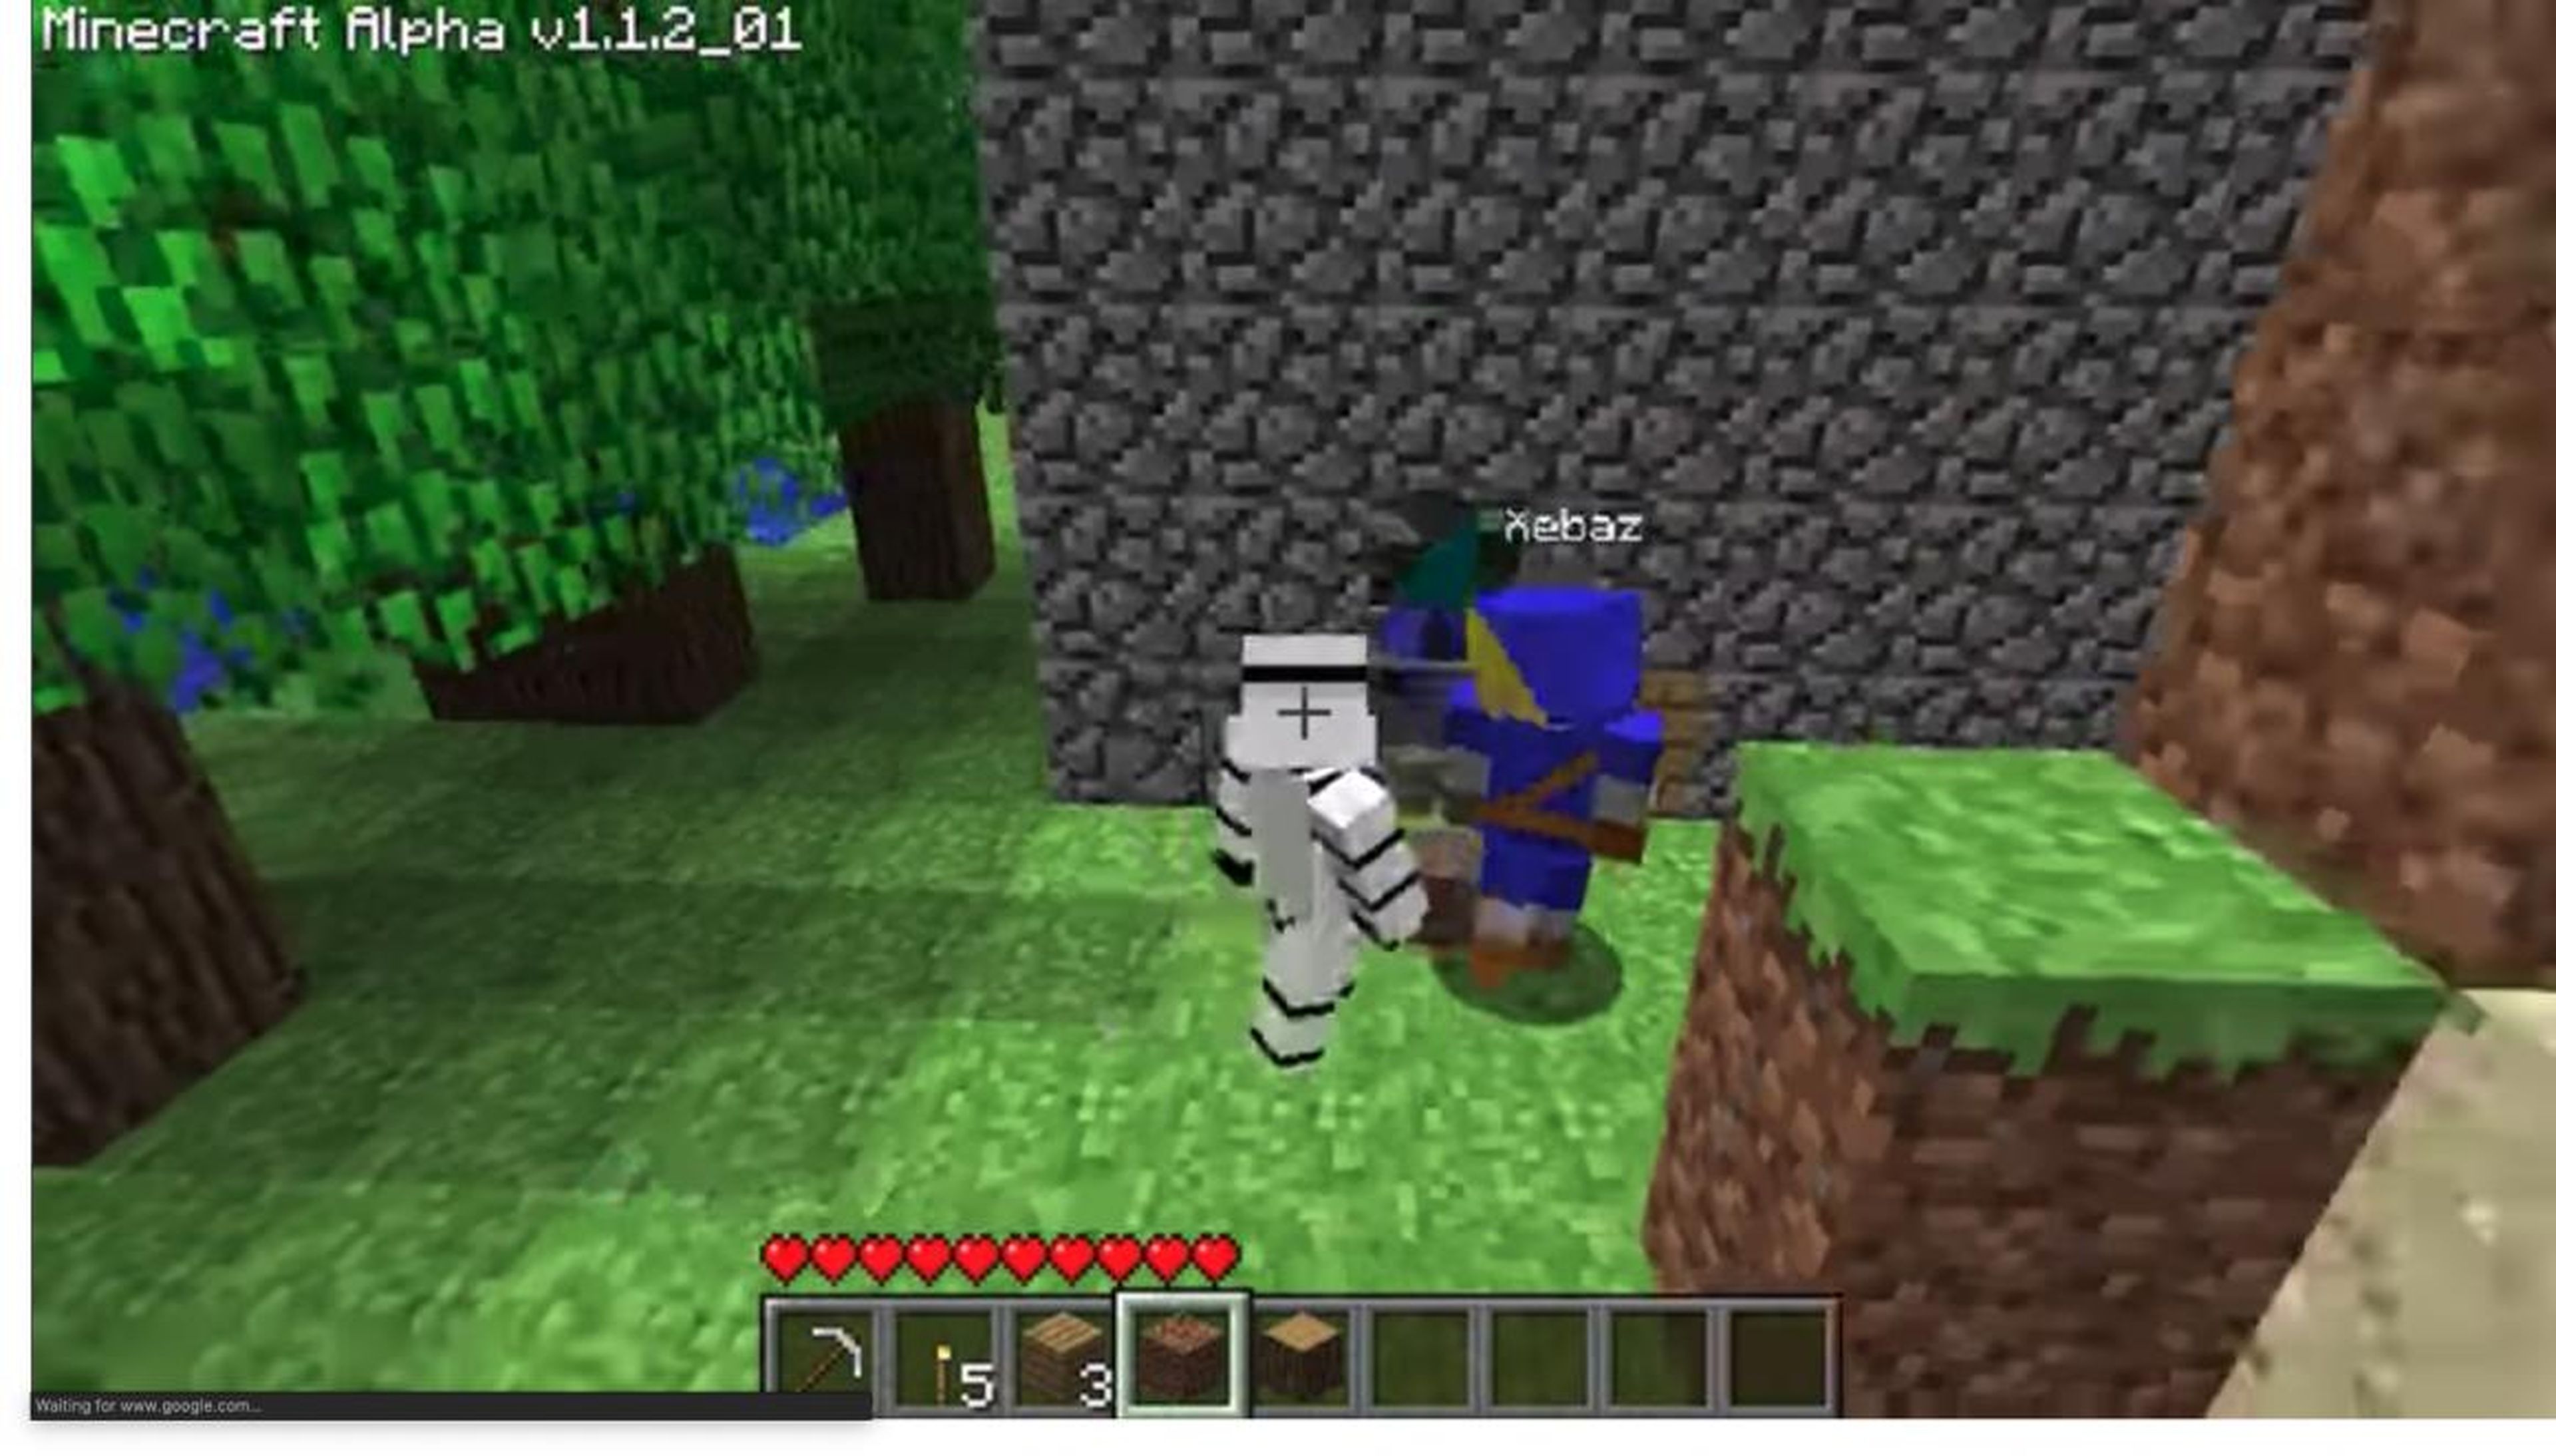 One of PewDiePie's first videos to become a hit was his play-by-play video of the beloved game "Minecraft." His antics and voiceover comments have earned him over 12 million views and counting on the 2010 video.